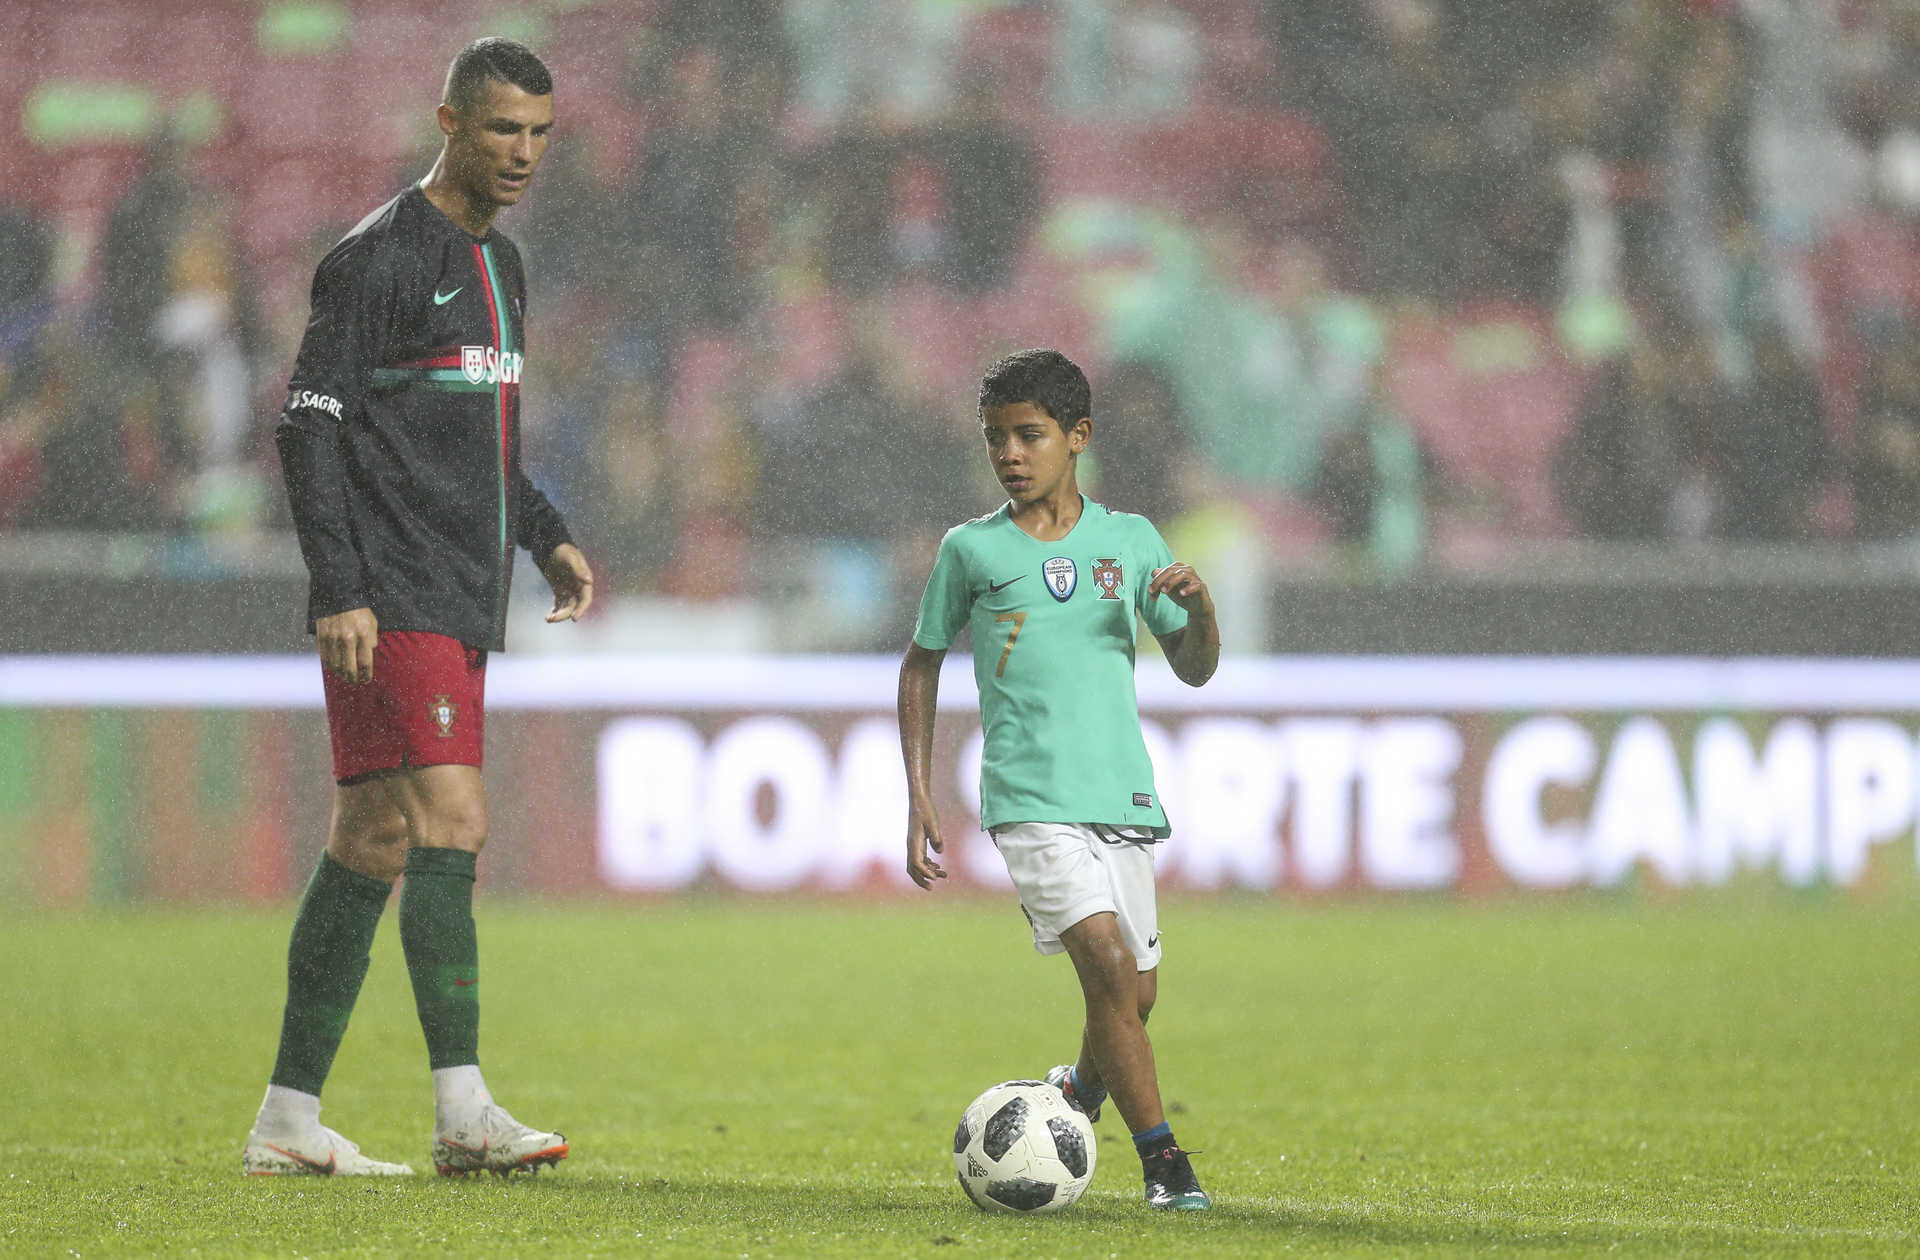 The eldest son of Cristiano Ronaldo is already registered in Portugal